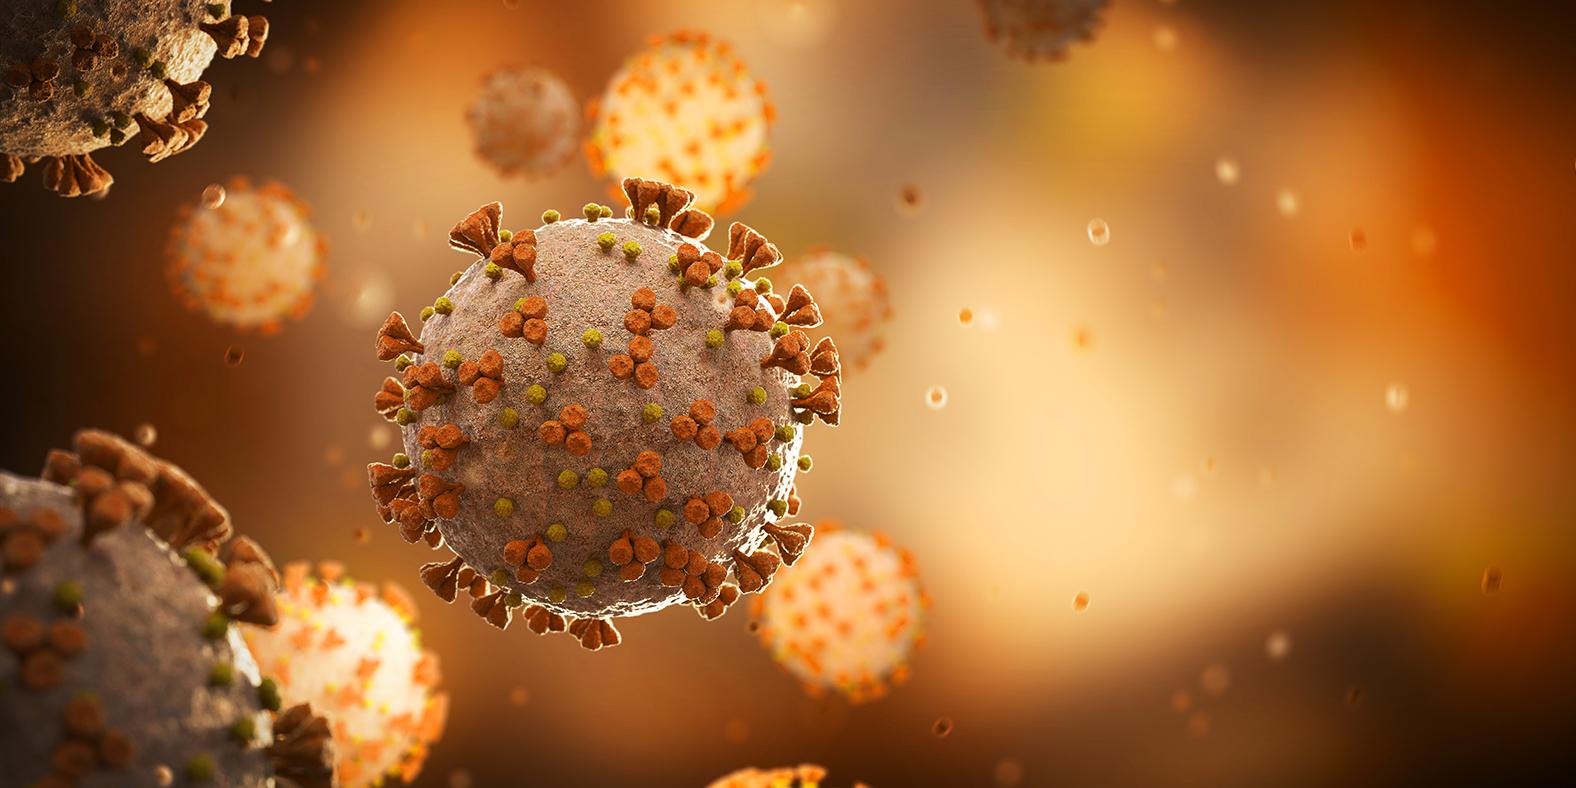 Microscopic view of COVID virus on orange-gold background